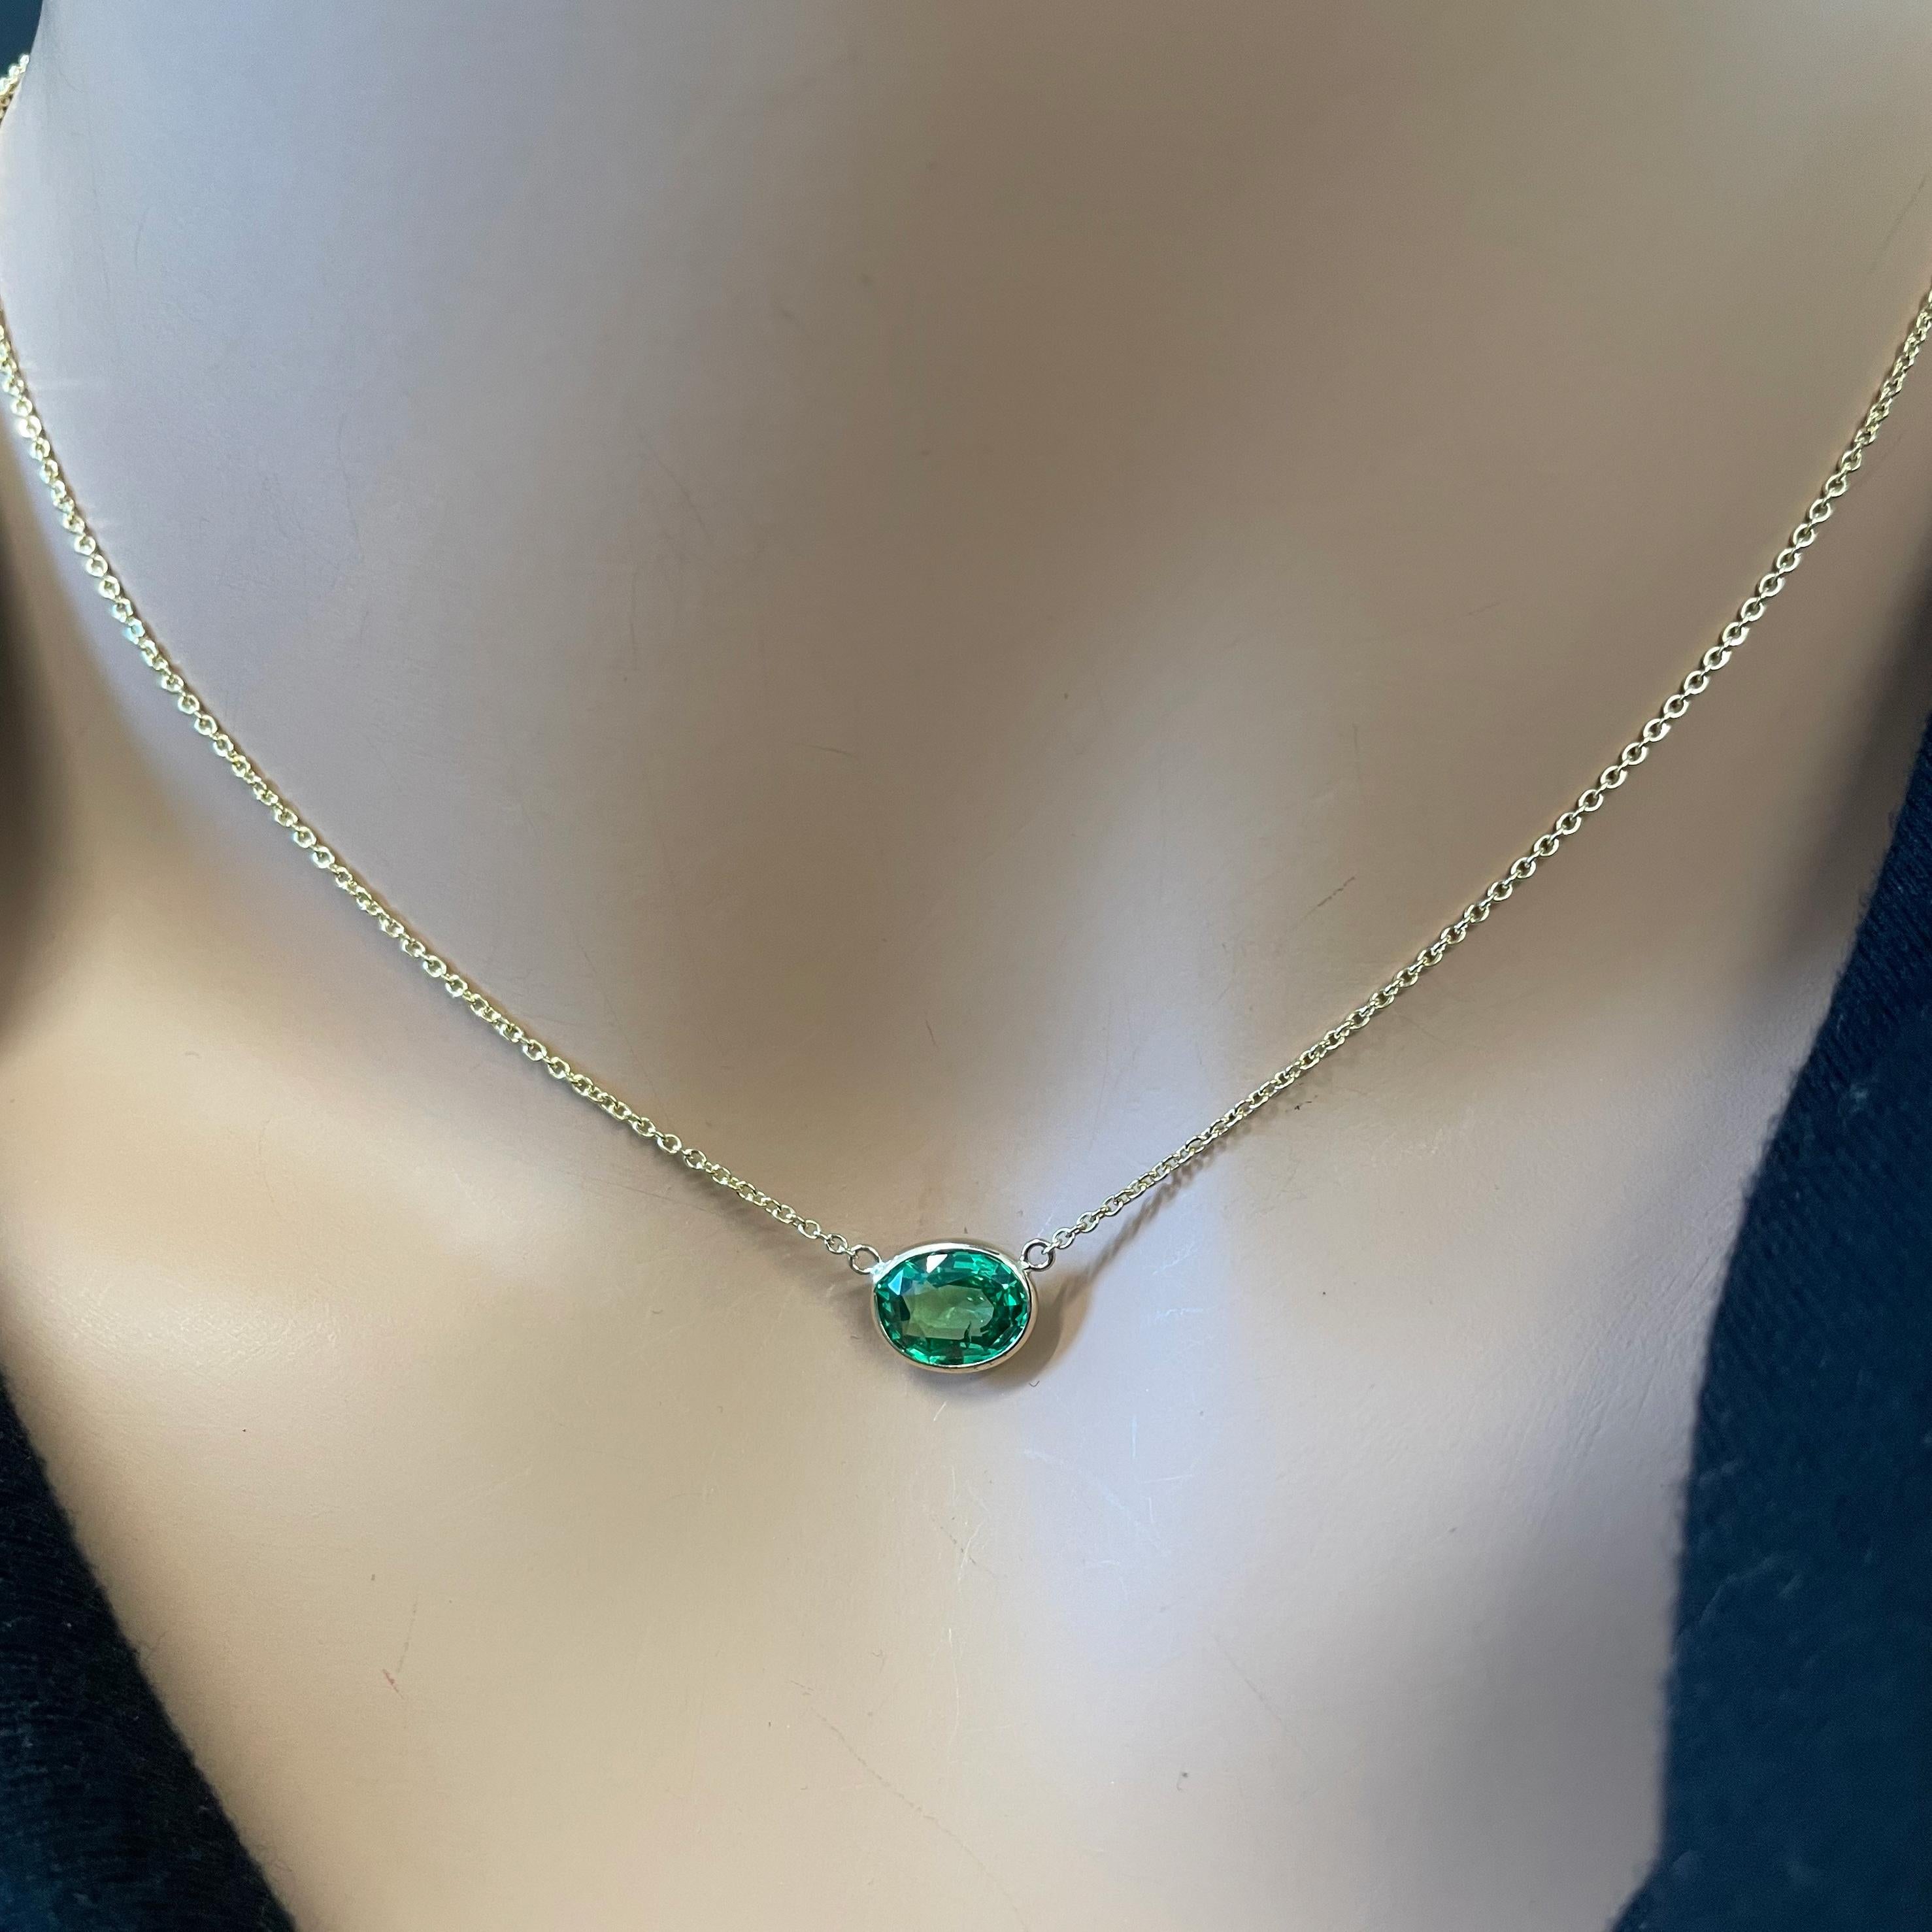 The 2.02 carat Oval Cut Green Tsavorite Necklace in 14K Yellow Gold is a captivating and elegant piece of jewelry that effortlessly combines natural beauty with timeless design. This necklace features a mesmerizing green Tsavorite gemstone,